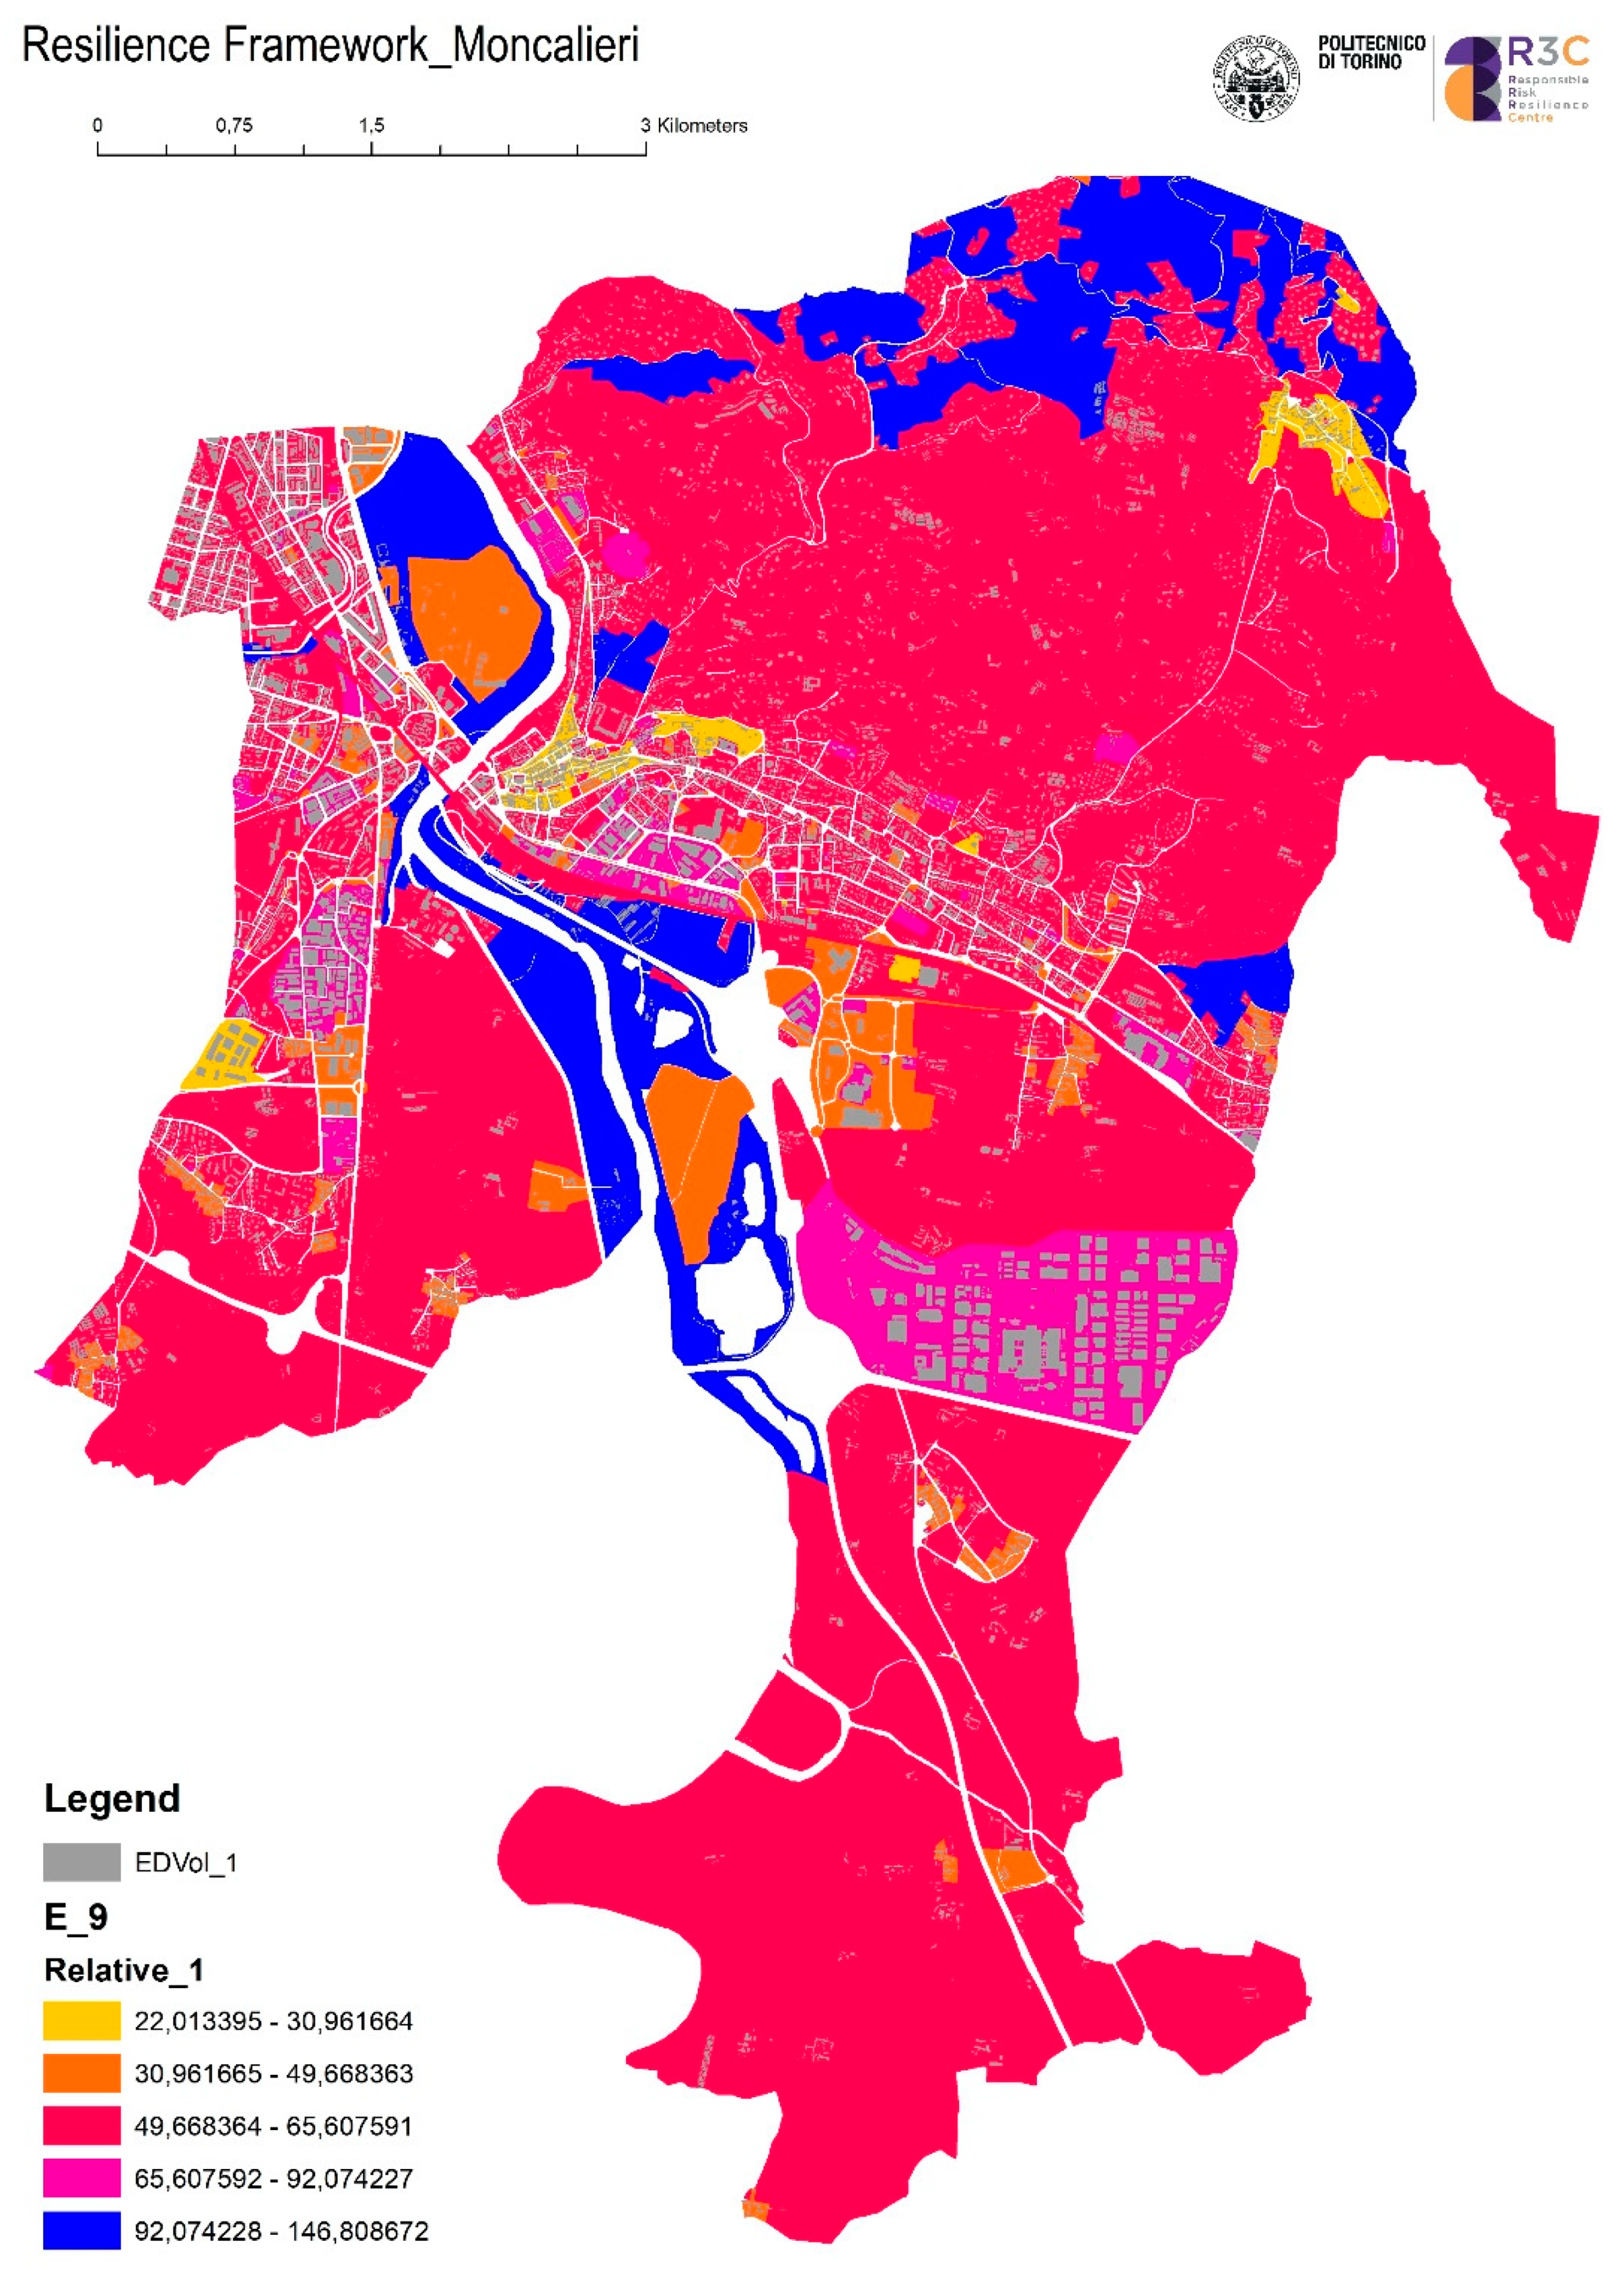 Sustainability | Free Full-Text | Mainstreaming Energetic Resilience by  Morphological Assessment in Ordinary Land Use Planning. The Case Study of  Moncalieri, Turin (Italy) | HTML